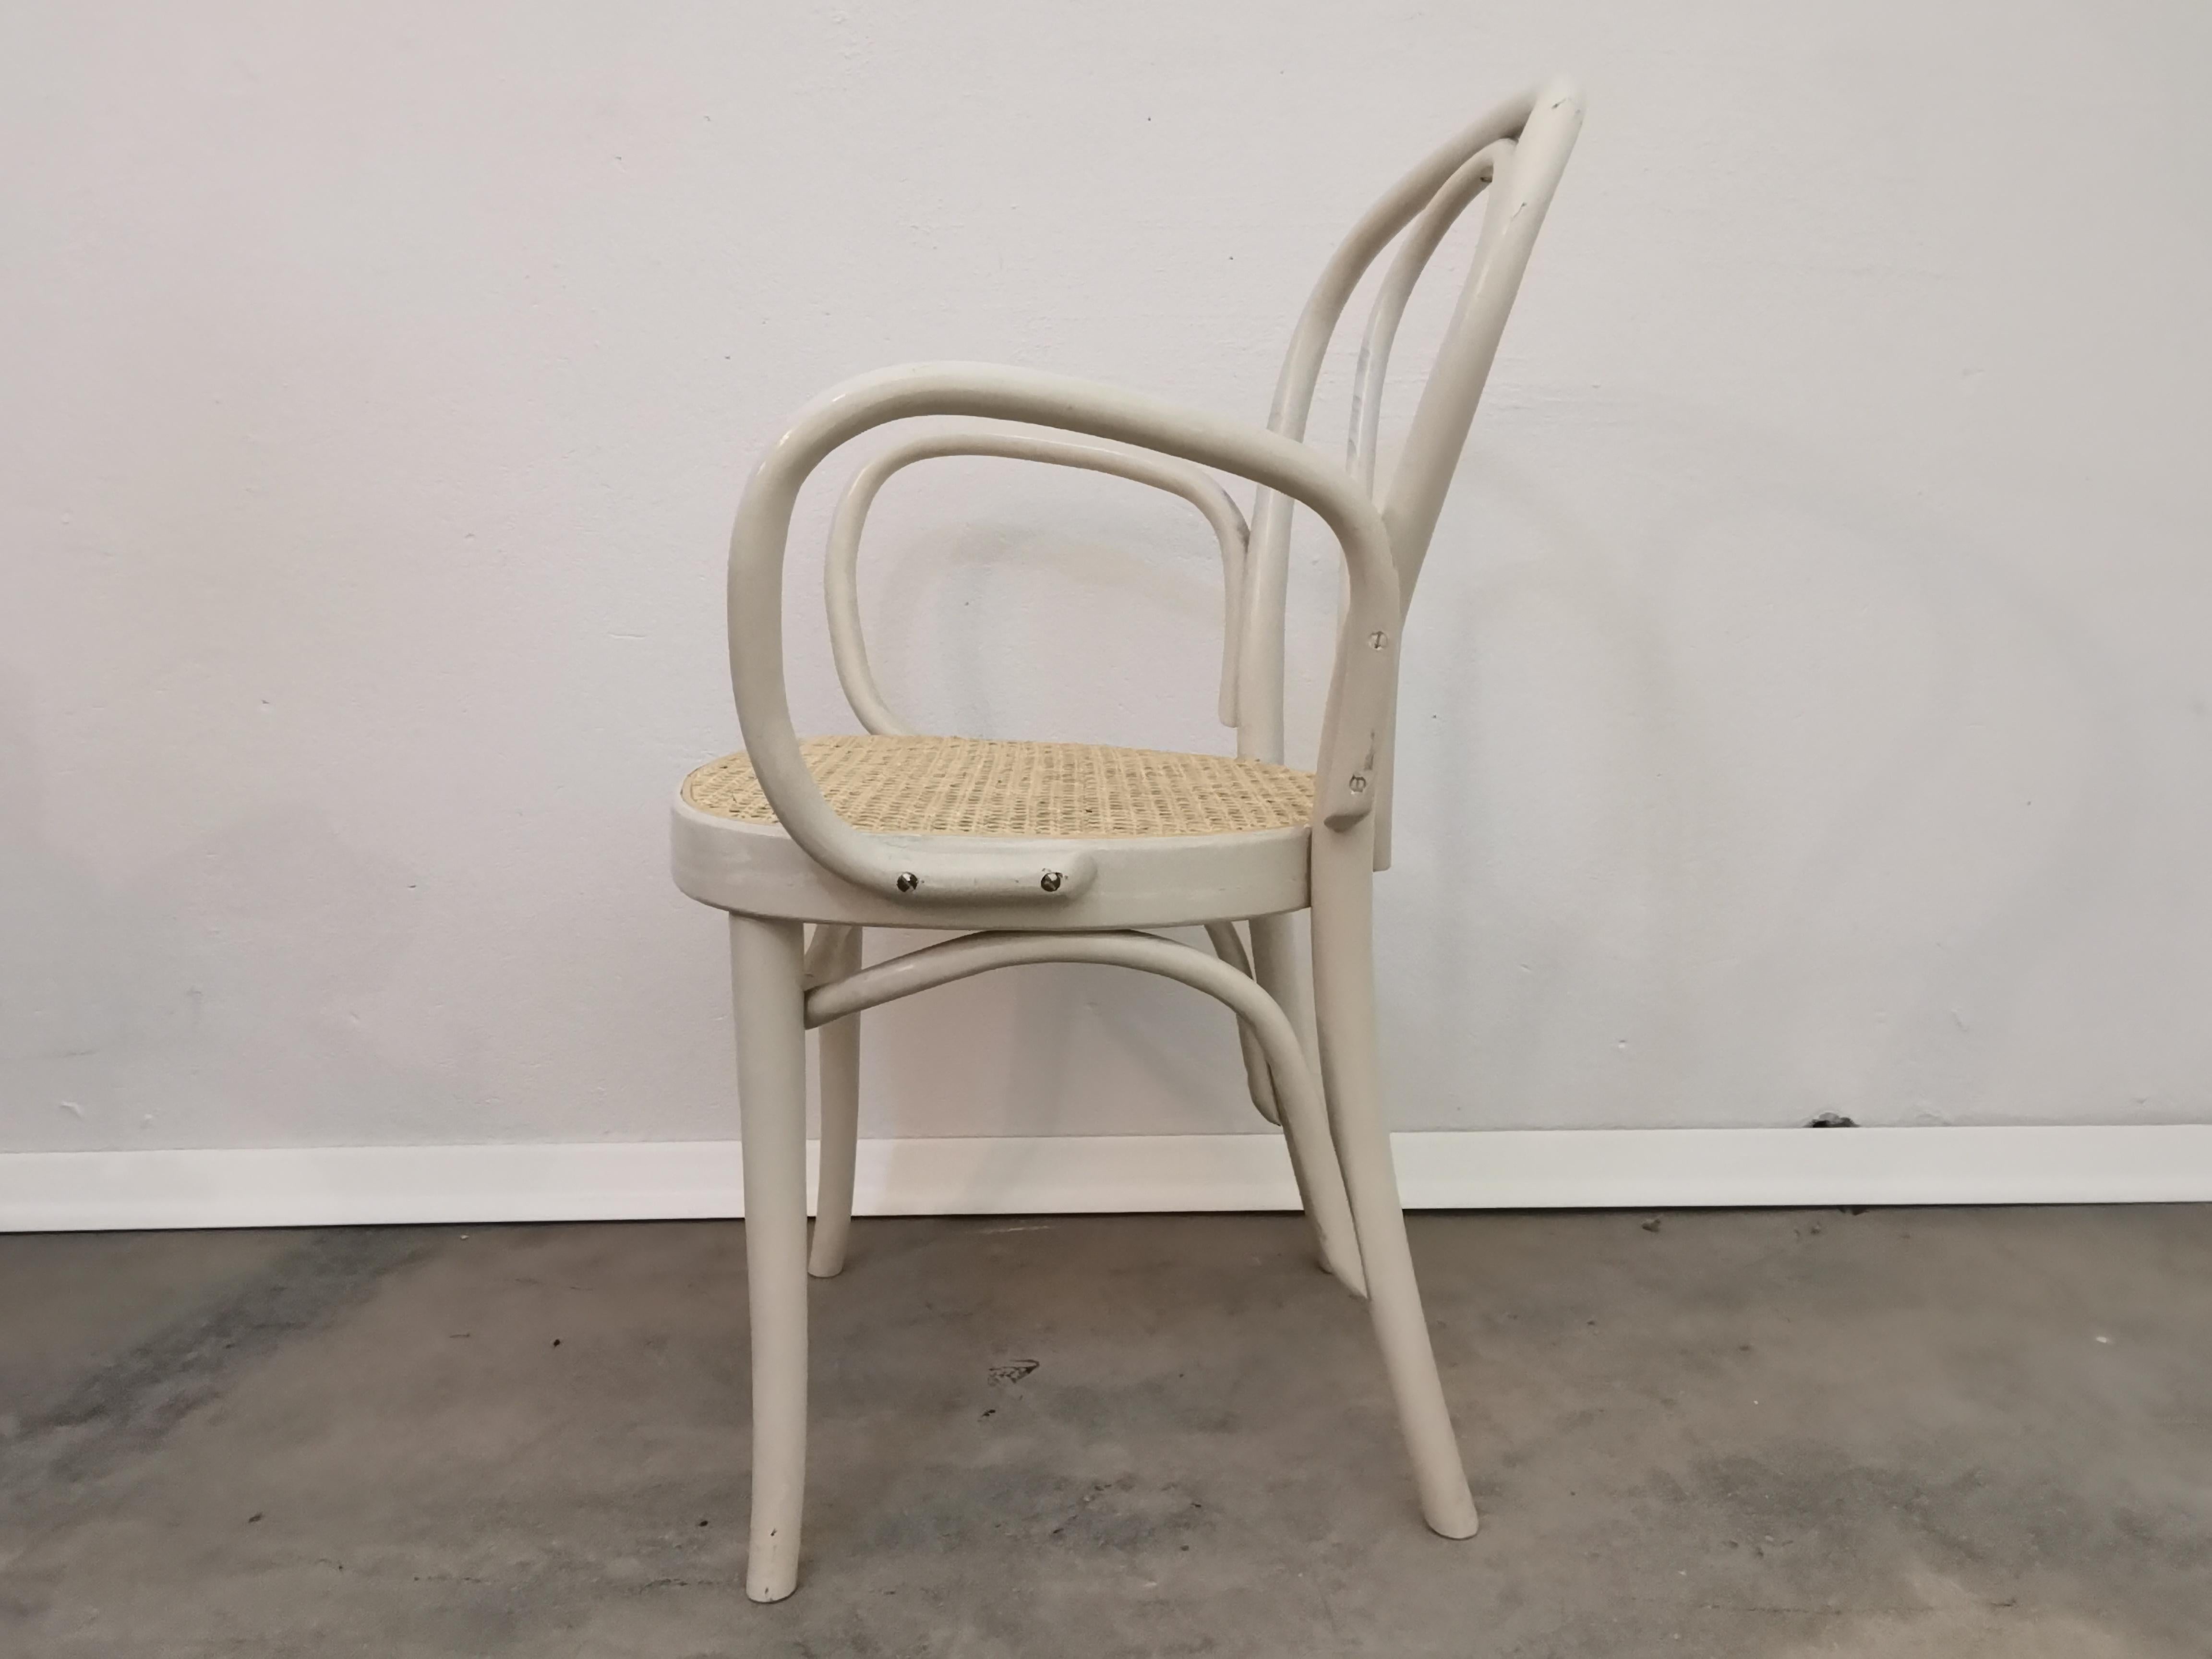 Bentwood armchair with Cane Seat

Period of production: 1970s

Style: vintage classic design

Materials: bentwood, vienna cane

Colour: white.